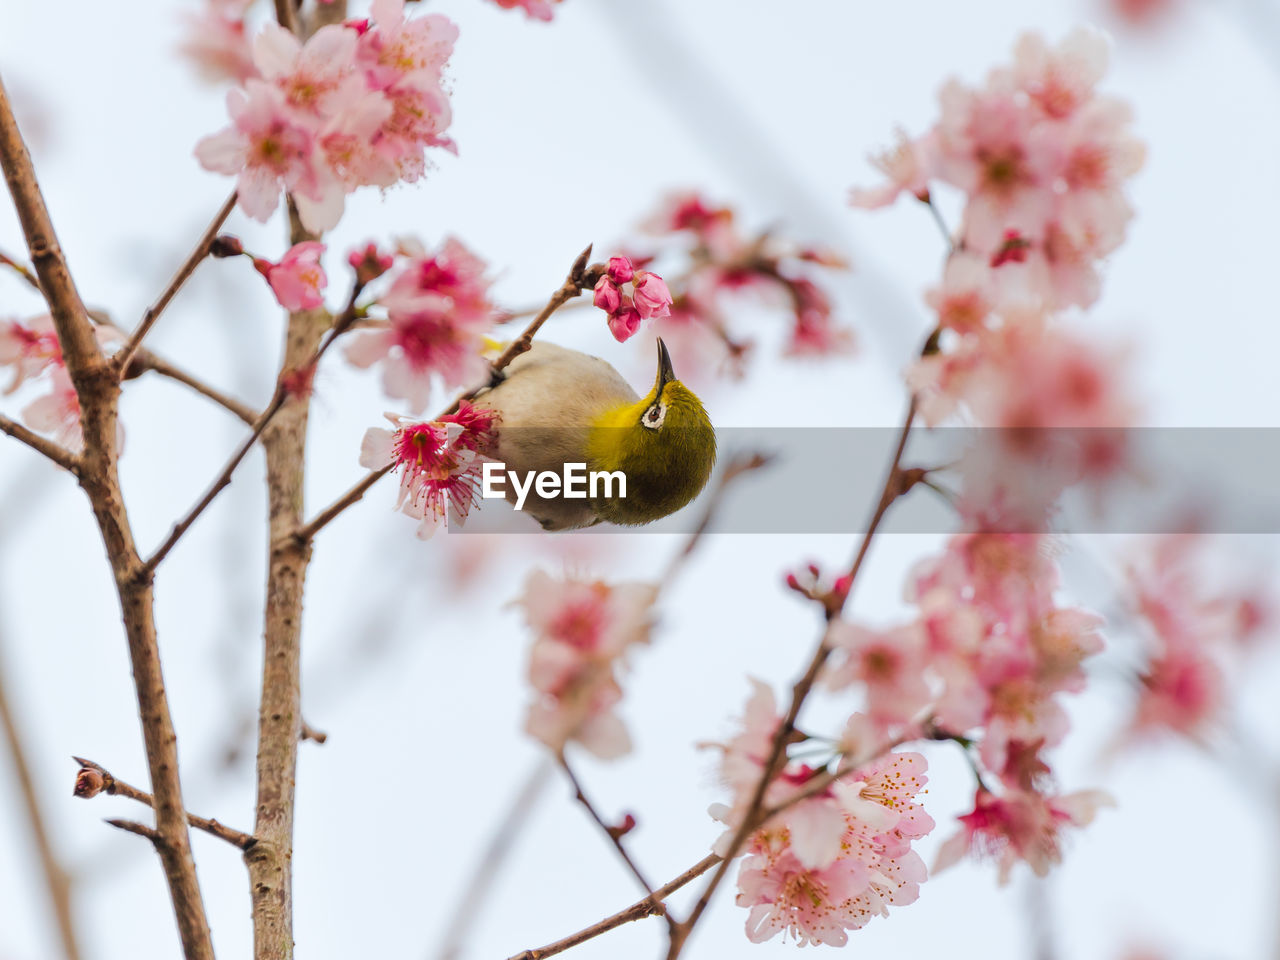 plant, spring, tree, flower, blossom, branch, flowering plant, beauty in nature, freshness, springtime, nature, fragility, cherry blossom, pink, produce, growth, no people, fruit, food, plum blossom, outdoors, animal themes, animal, bird, day, focus on foreground, close-up, food and drink, cherry tree, twig, animal wildlife, macro photography, petal, flower head